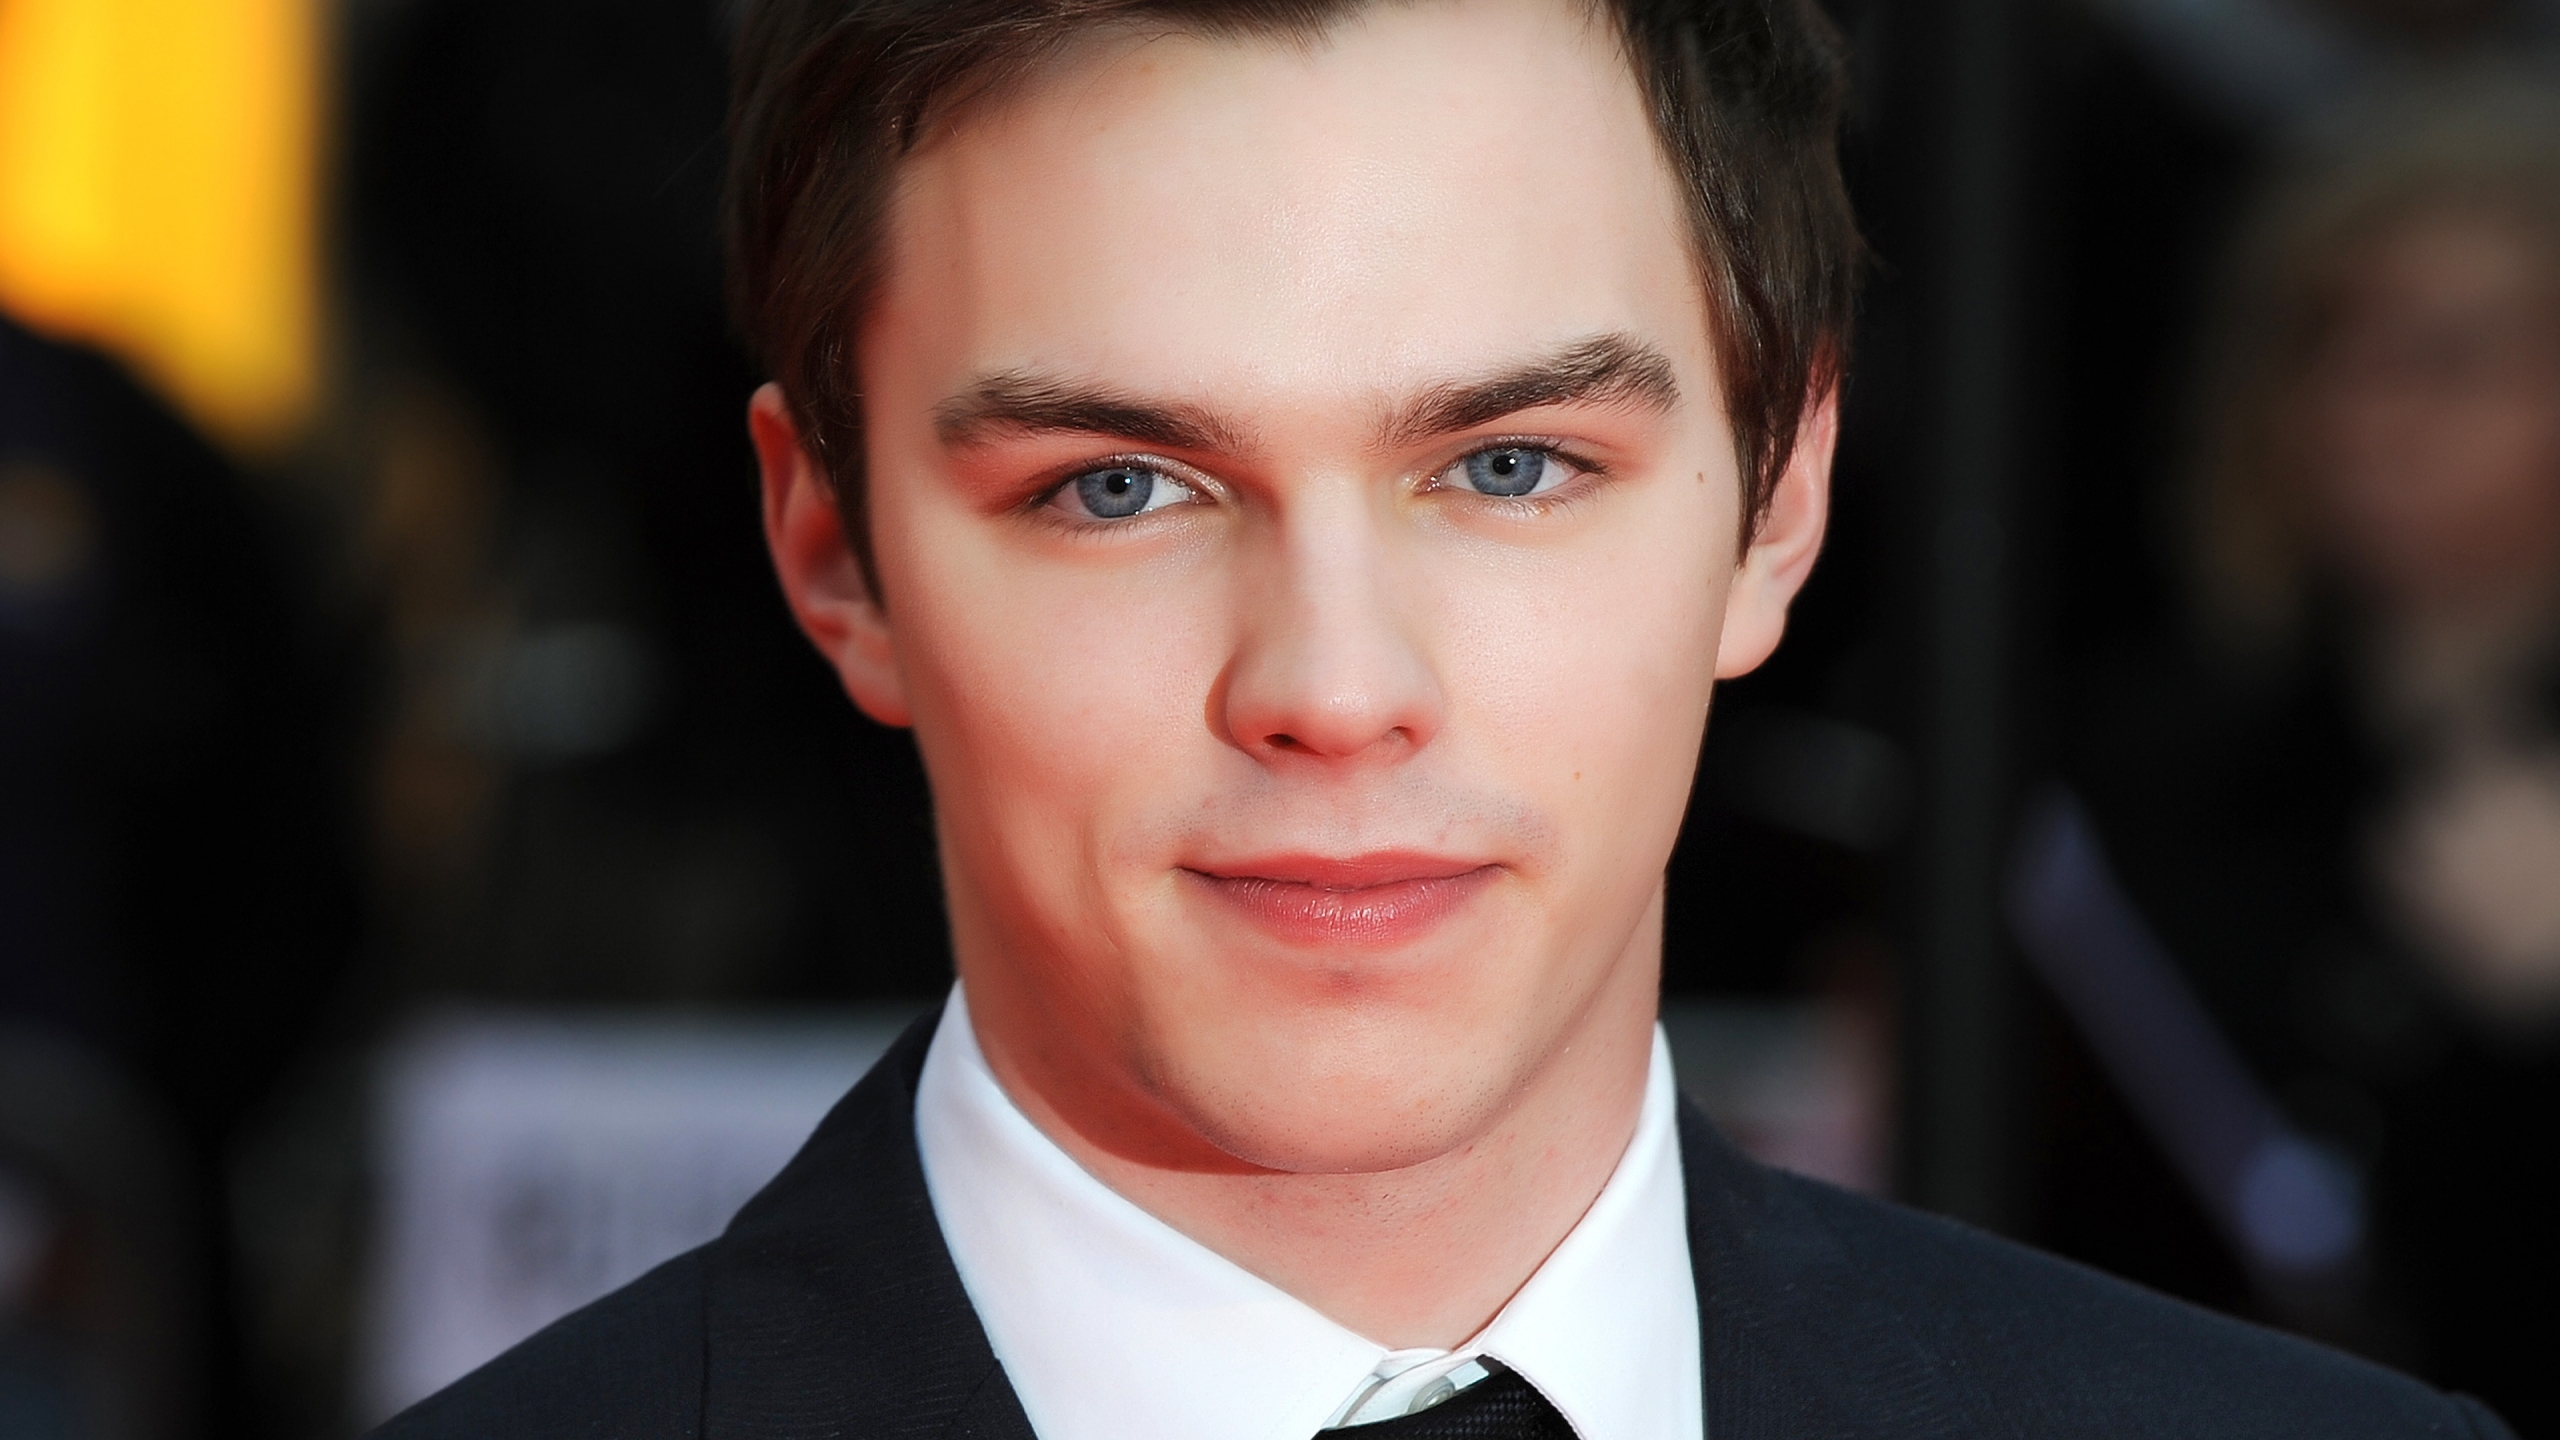 Nicholas Hoult Actor for 2560x1440 HDTV resolution